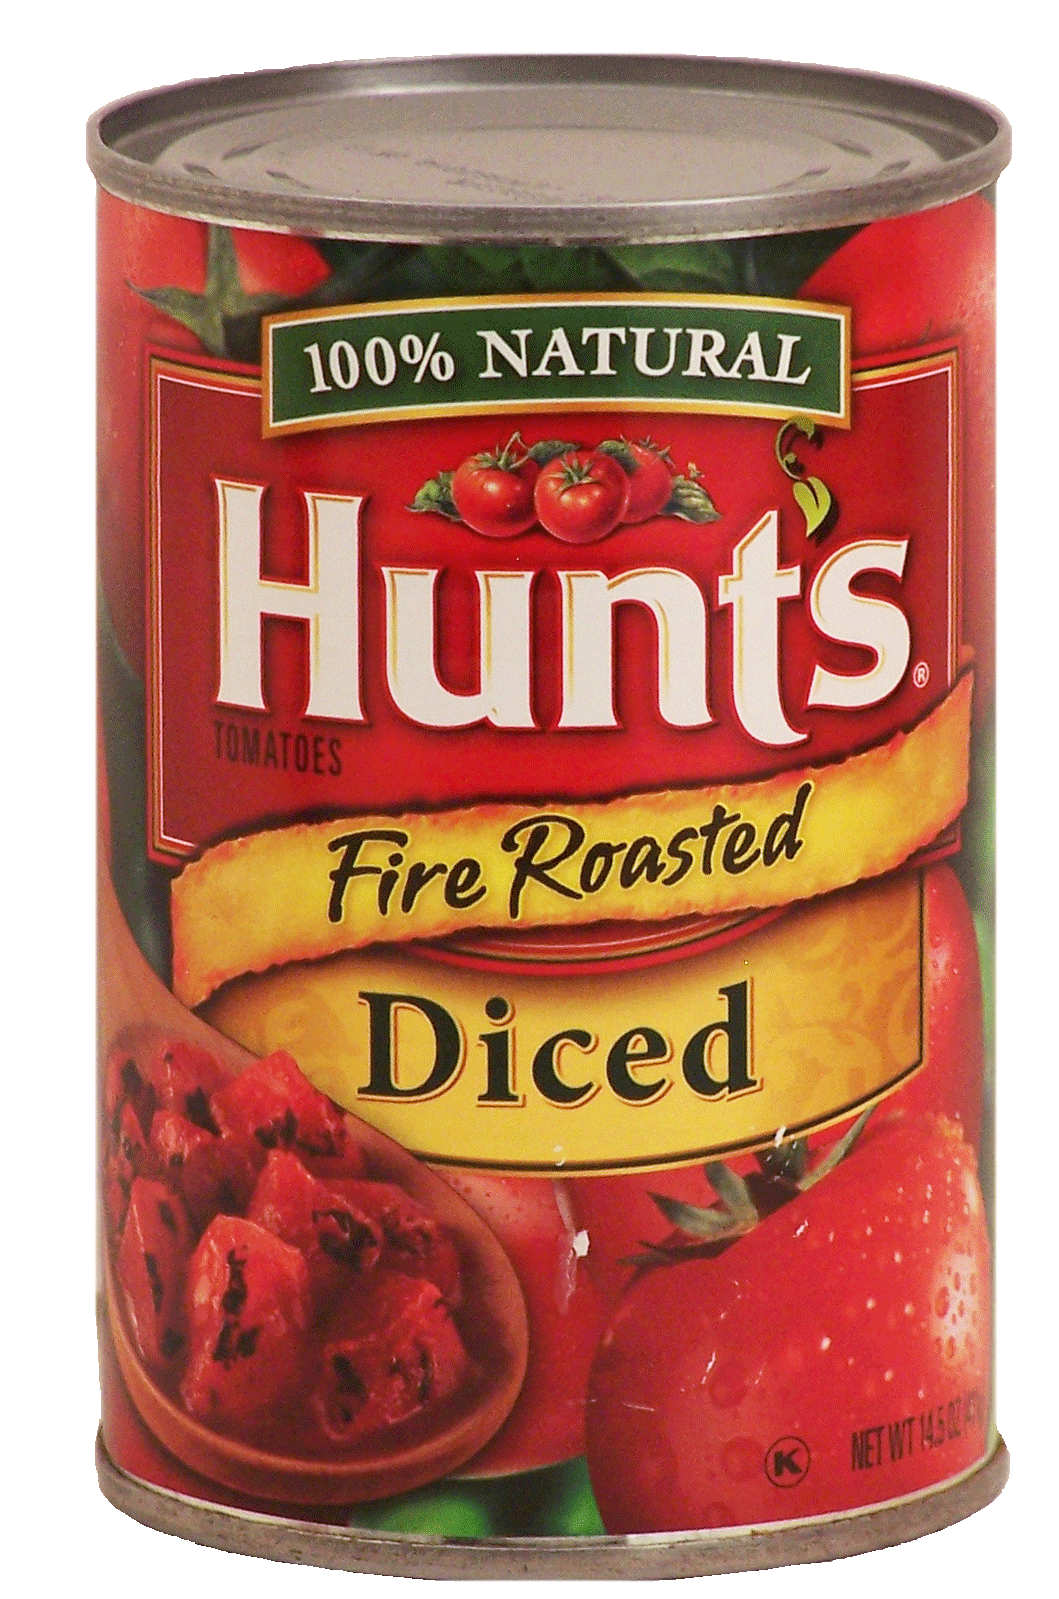 Hunt's Tomatoes Fire Roasted Diced Full-Size Picture